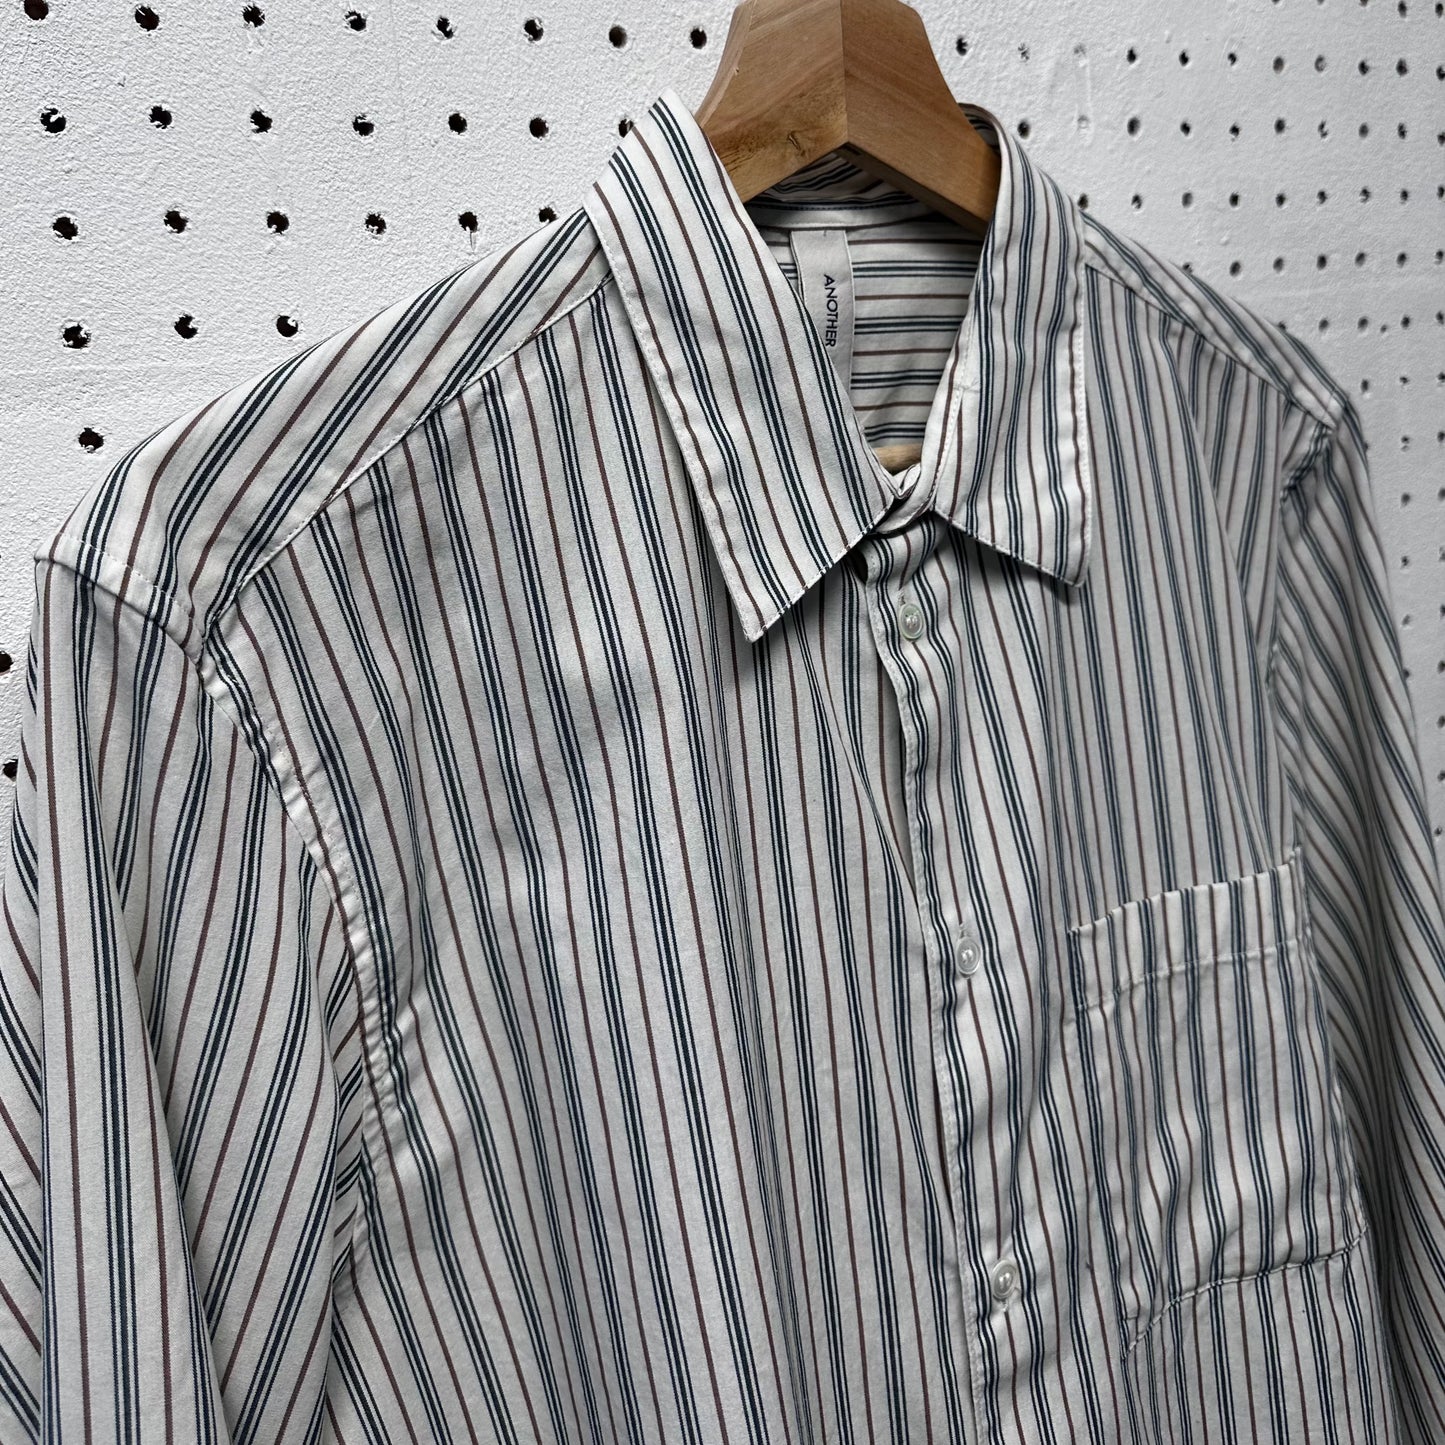 Another Aspect Another Shirt 3.0 - Small Green Stripe